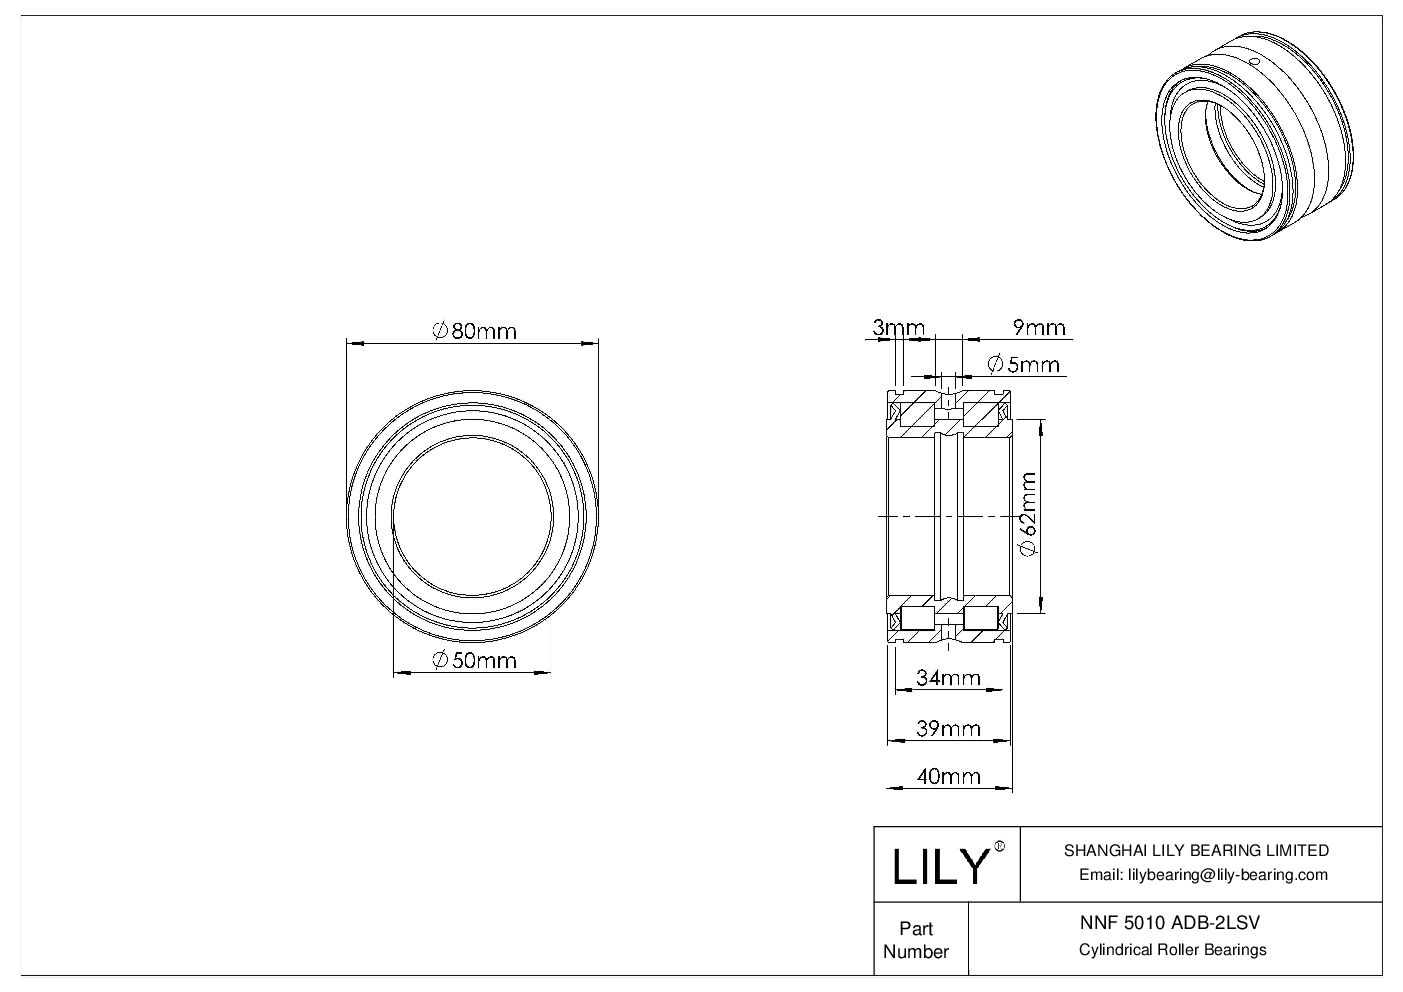 NNF 5010 ADB-2LSV Double Row Full Complement Cylindrical Roller Bearings cad drawing